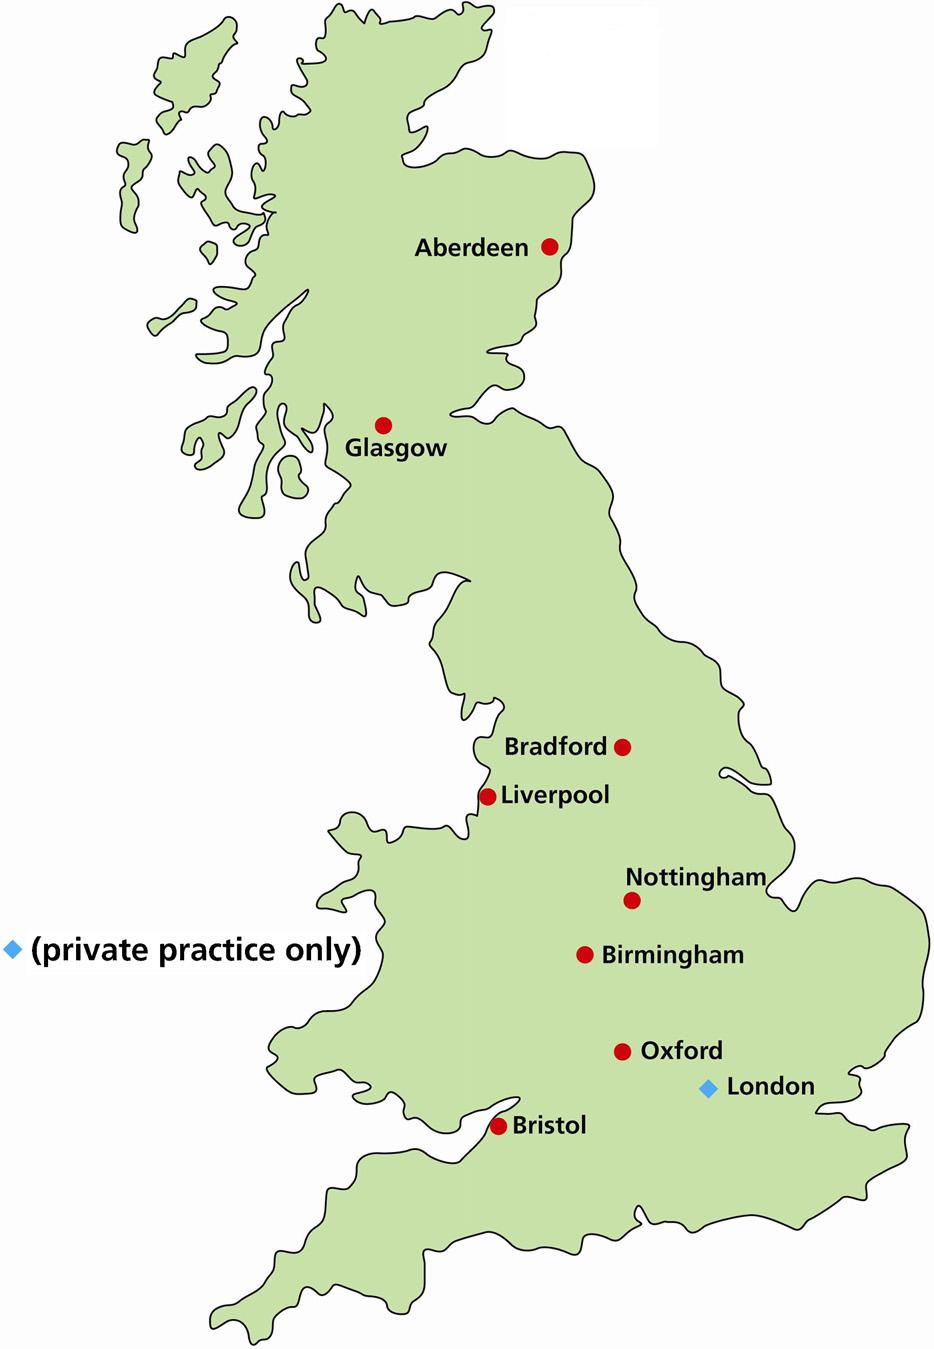 B. Speculand / British Journal of Oral and Maxillofacial Surgery 47 (2009) 37 41 39 Fig. 2. Distribution of centres offering reconstruction of the temporomandibular joint in the UK in 2007.